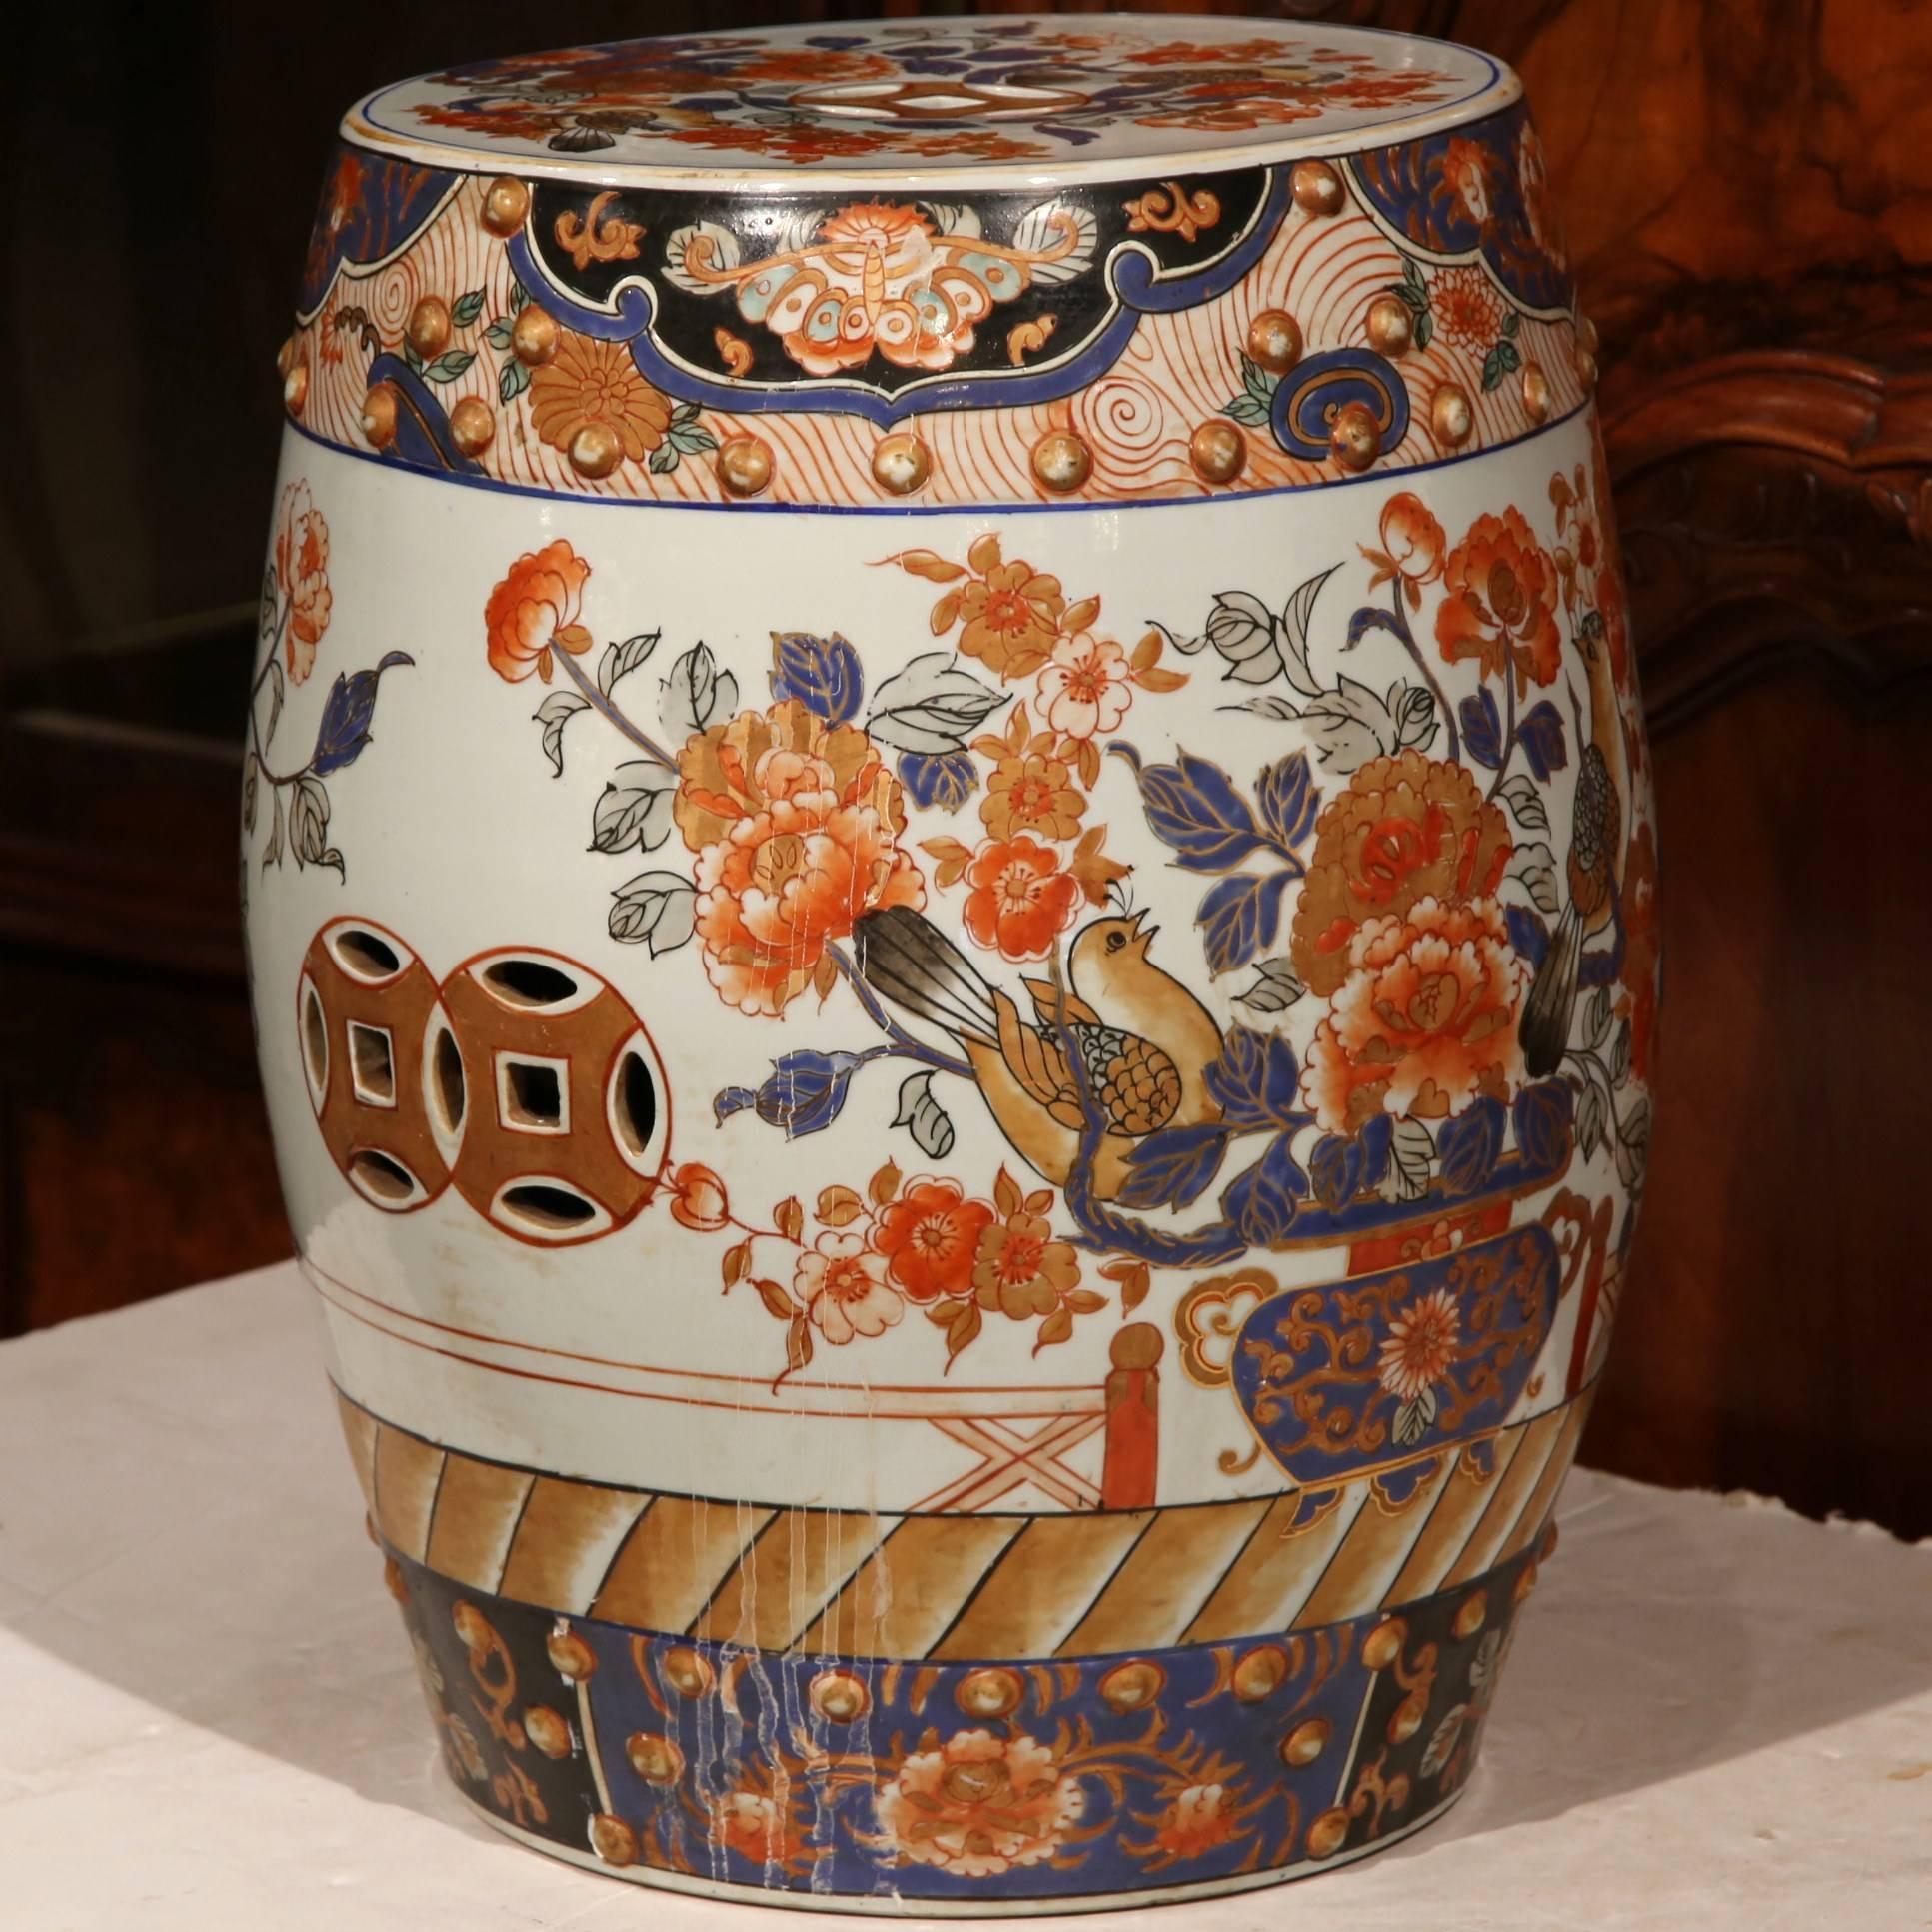 19th Century Japanese Hand-Painted Porcelain Imari Stool with Birds and Flowers 1